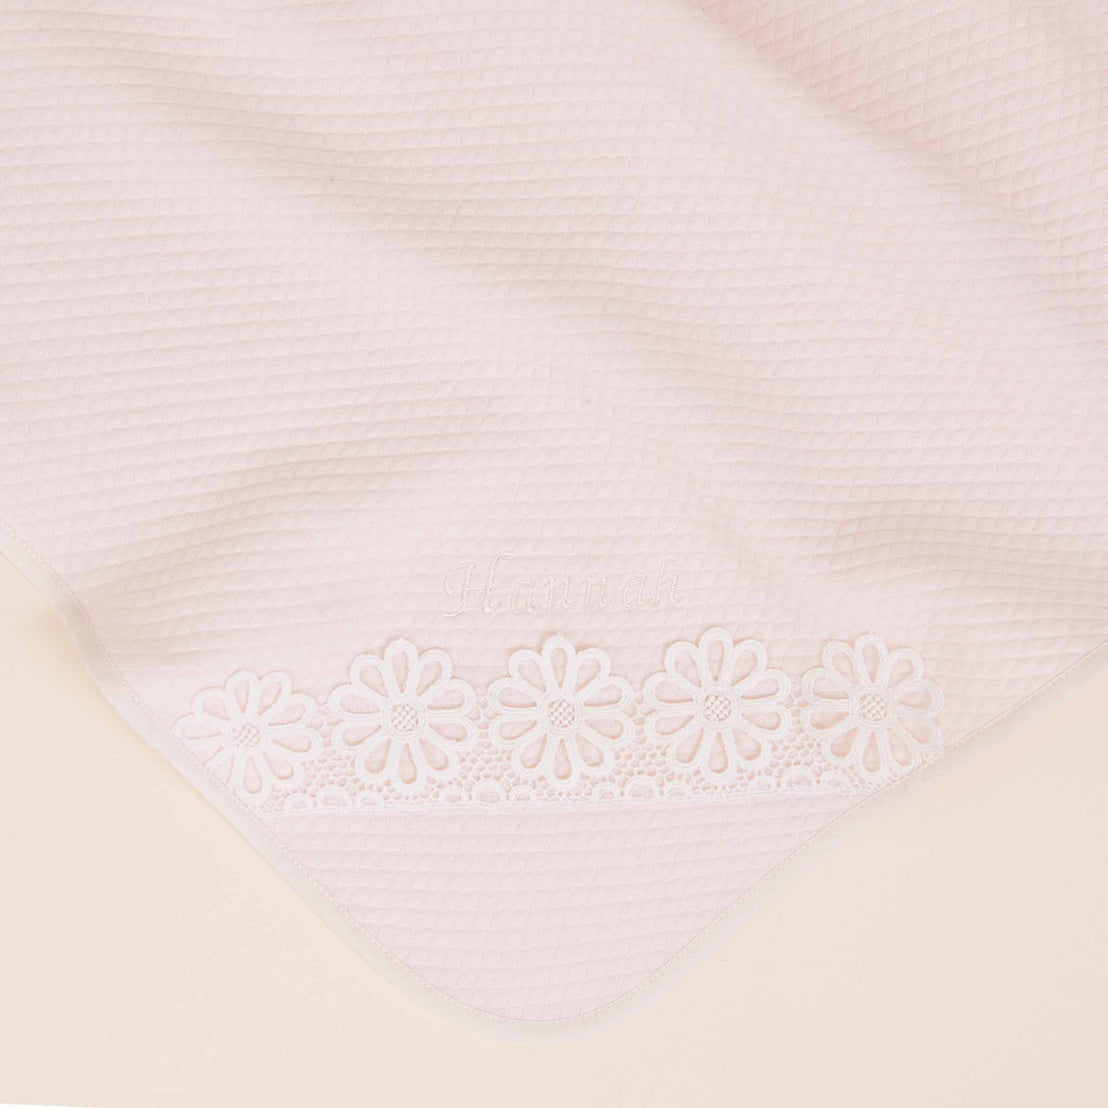 Close-up of a pale pink fabric with a delicate, white lace border featuring a floral pattern, set against a light background, ideal for Baby Beau & Belle's Hannah Personalized Blanket.